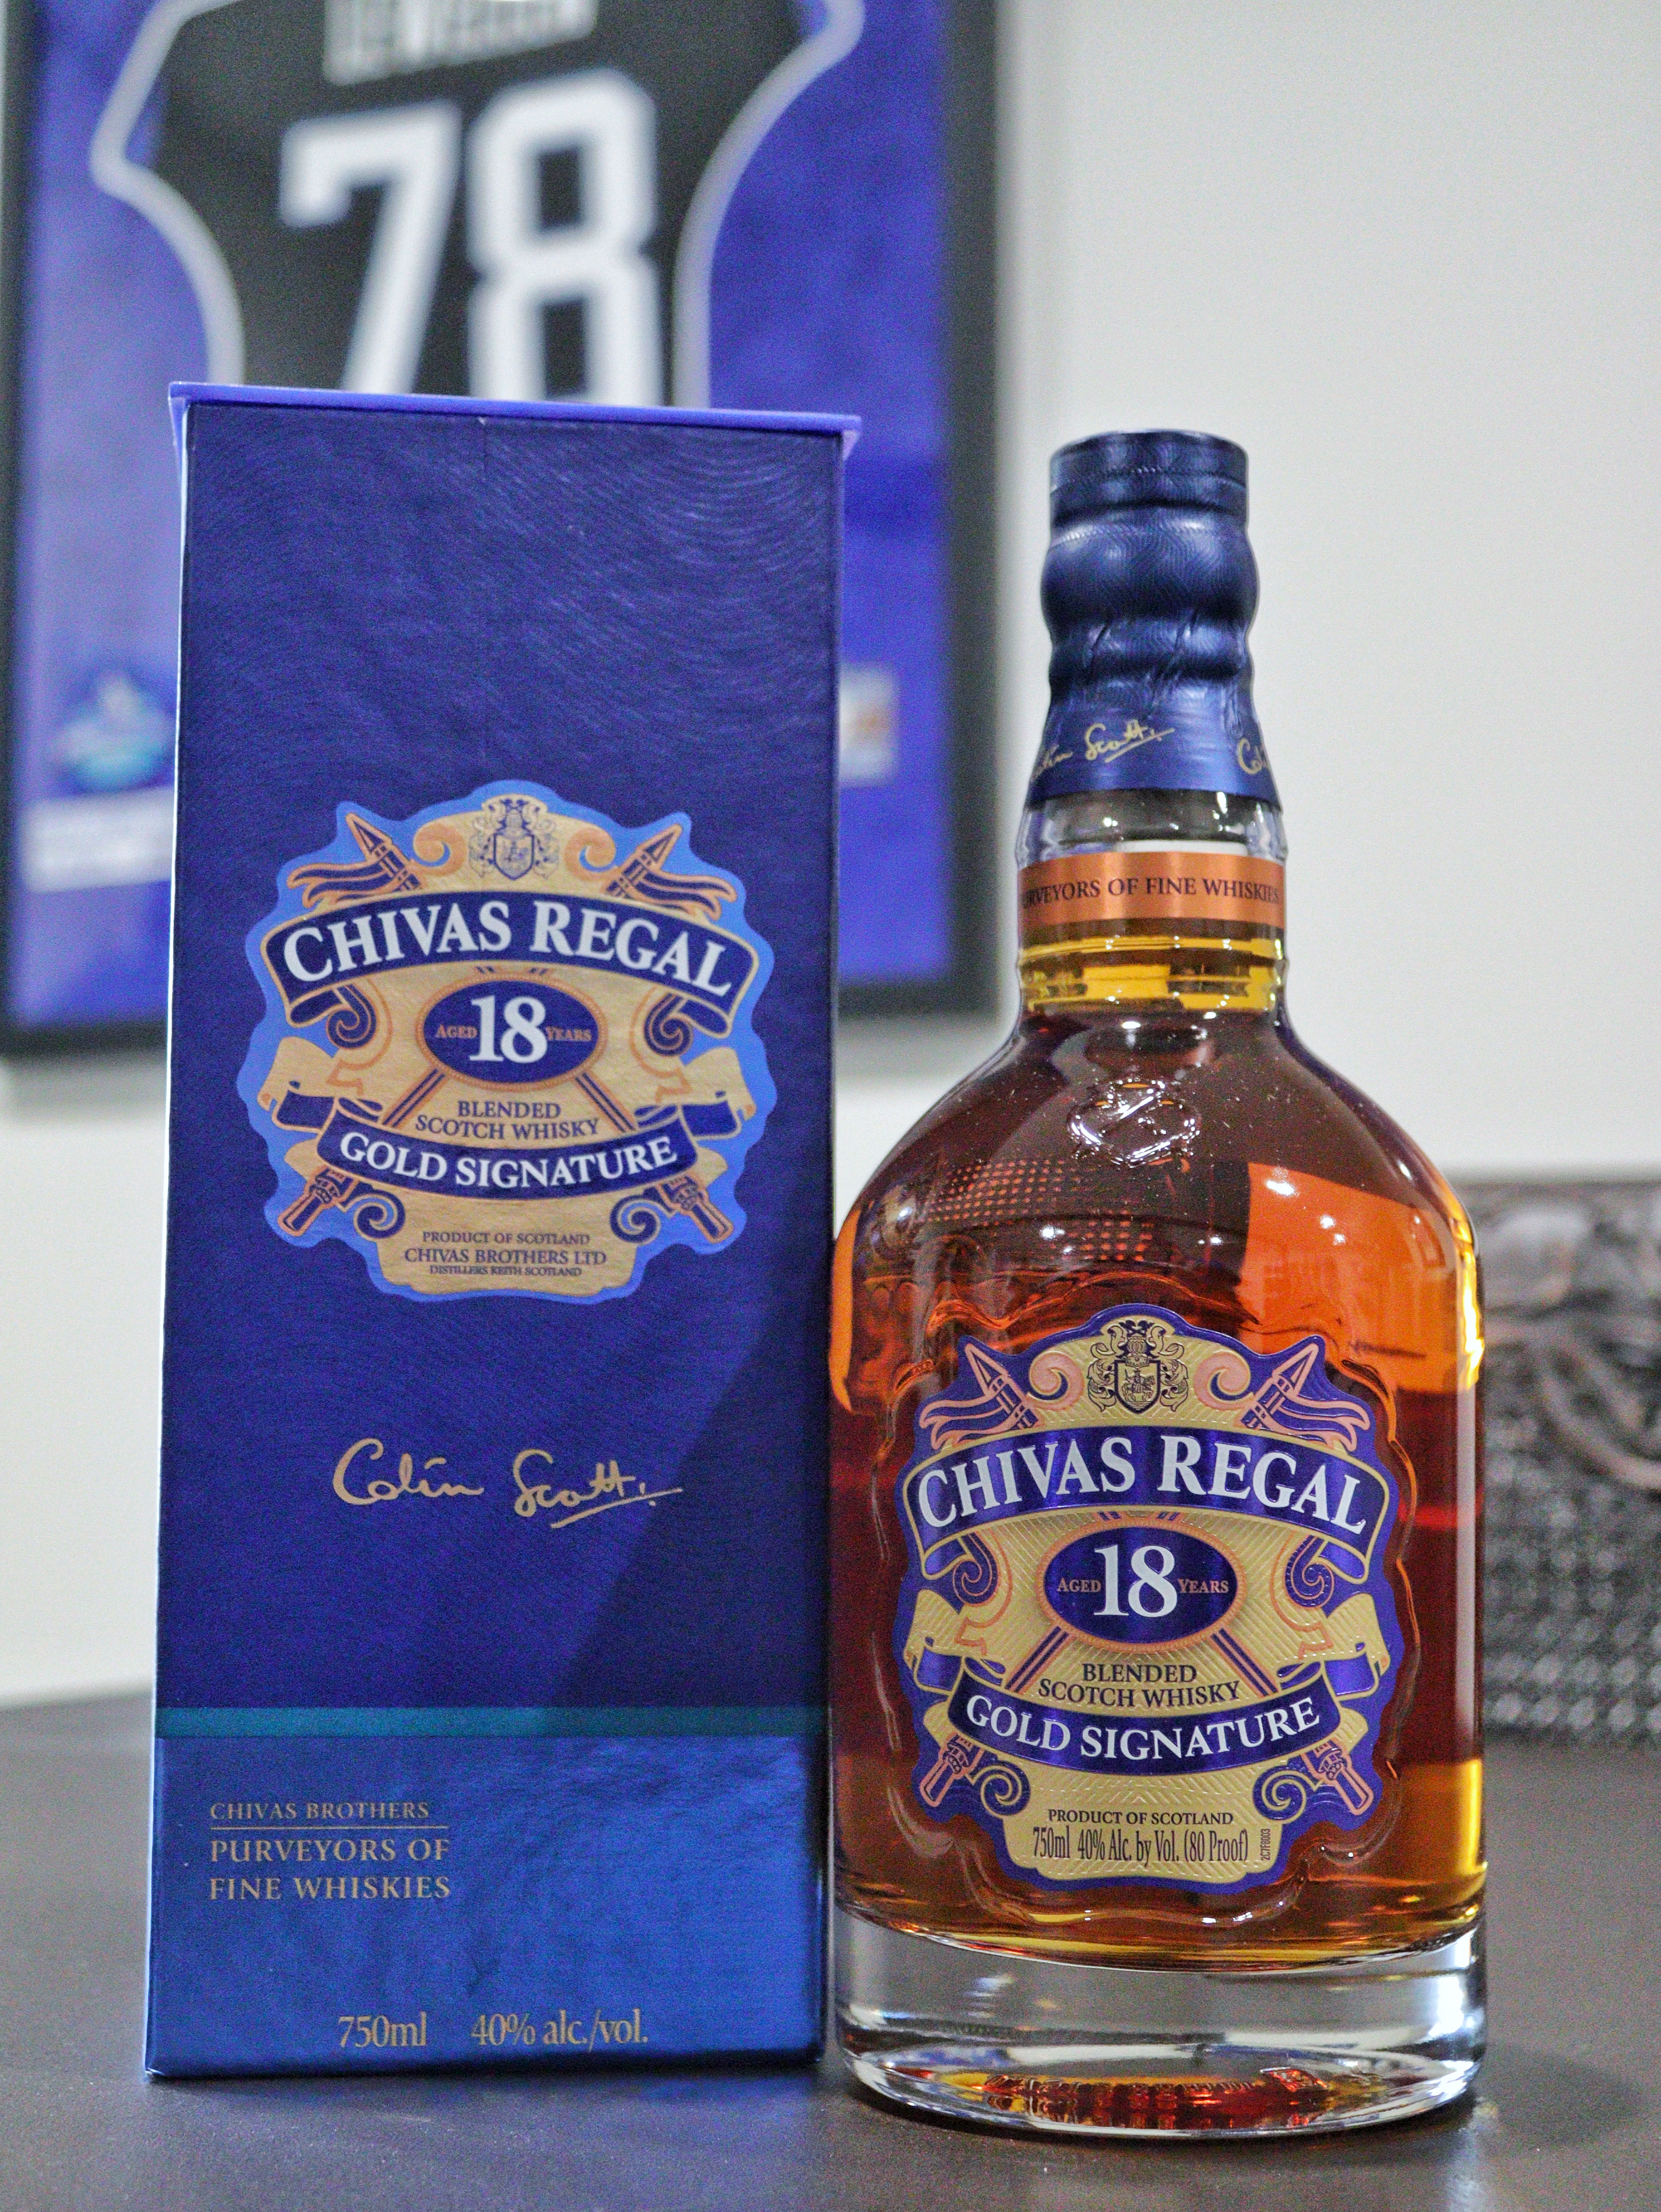 Chivas Regal 18 – My First Ever Blended Scotch Whisky